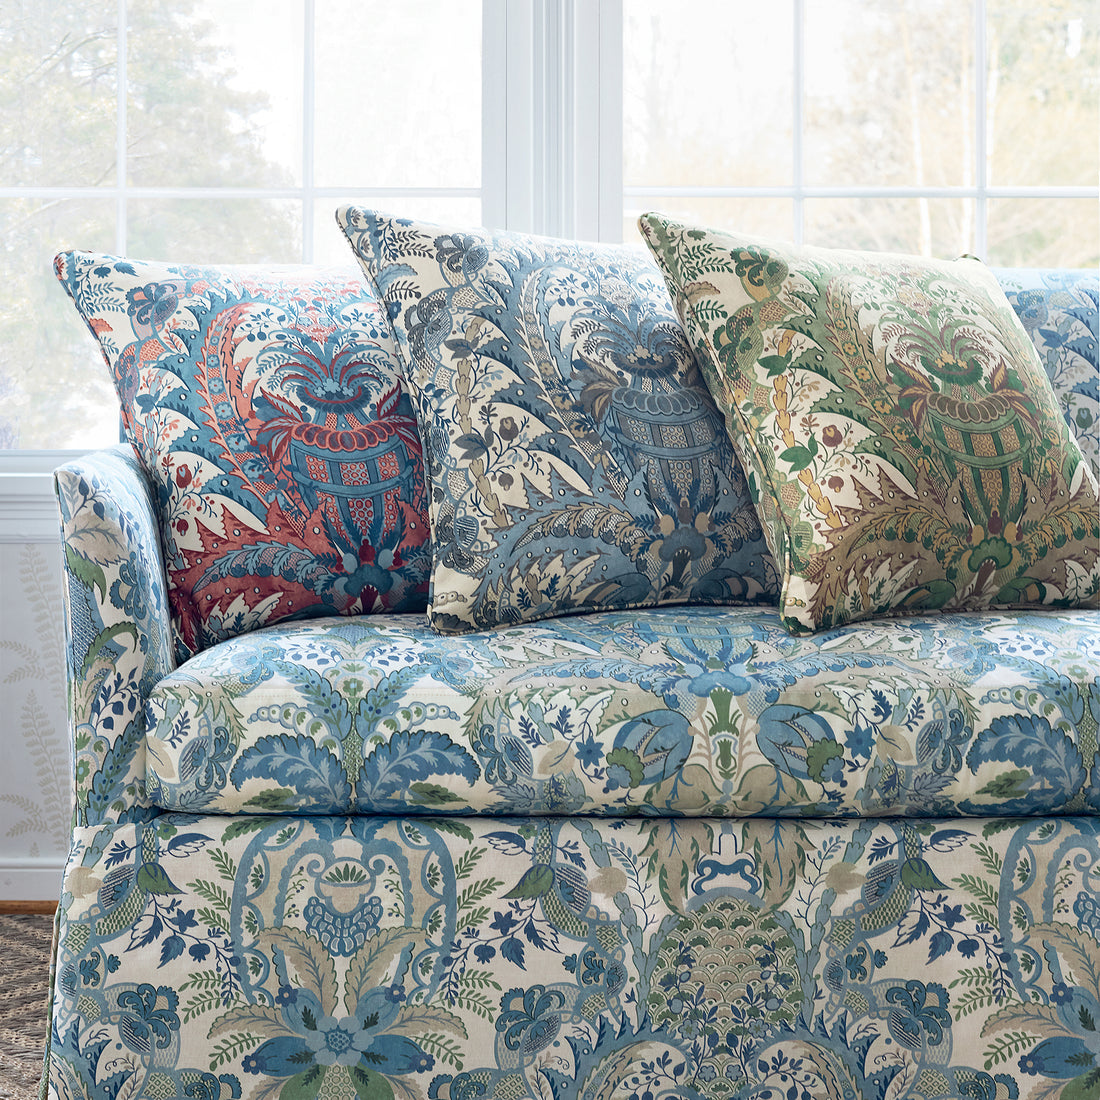 Collection of addison sofa with skirt and pillow fabrics in Narbeth printed fabric featuring slate and grey color fabric - pattern number AF57862 - by Anna French in the Bristol collection